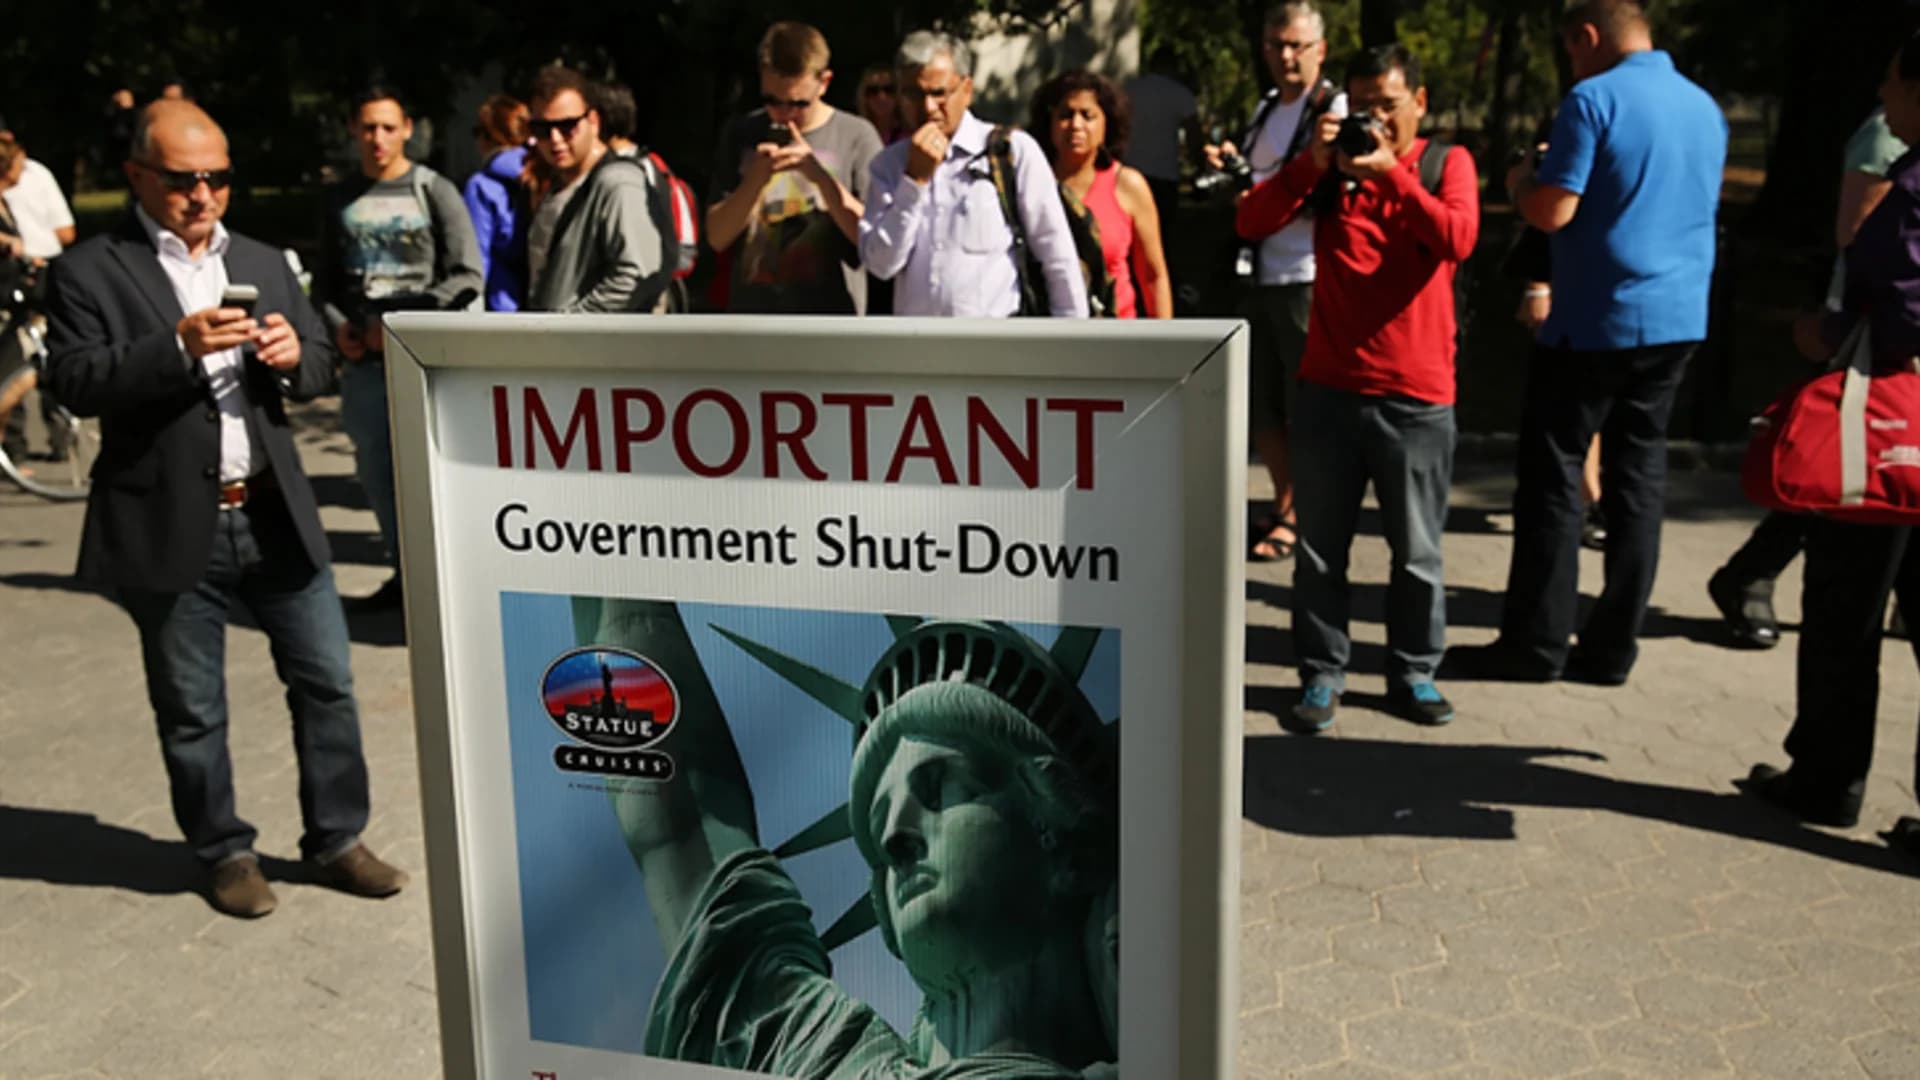 What's affected by a government shutdown?